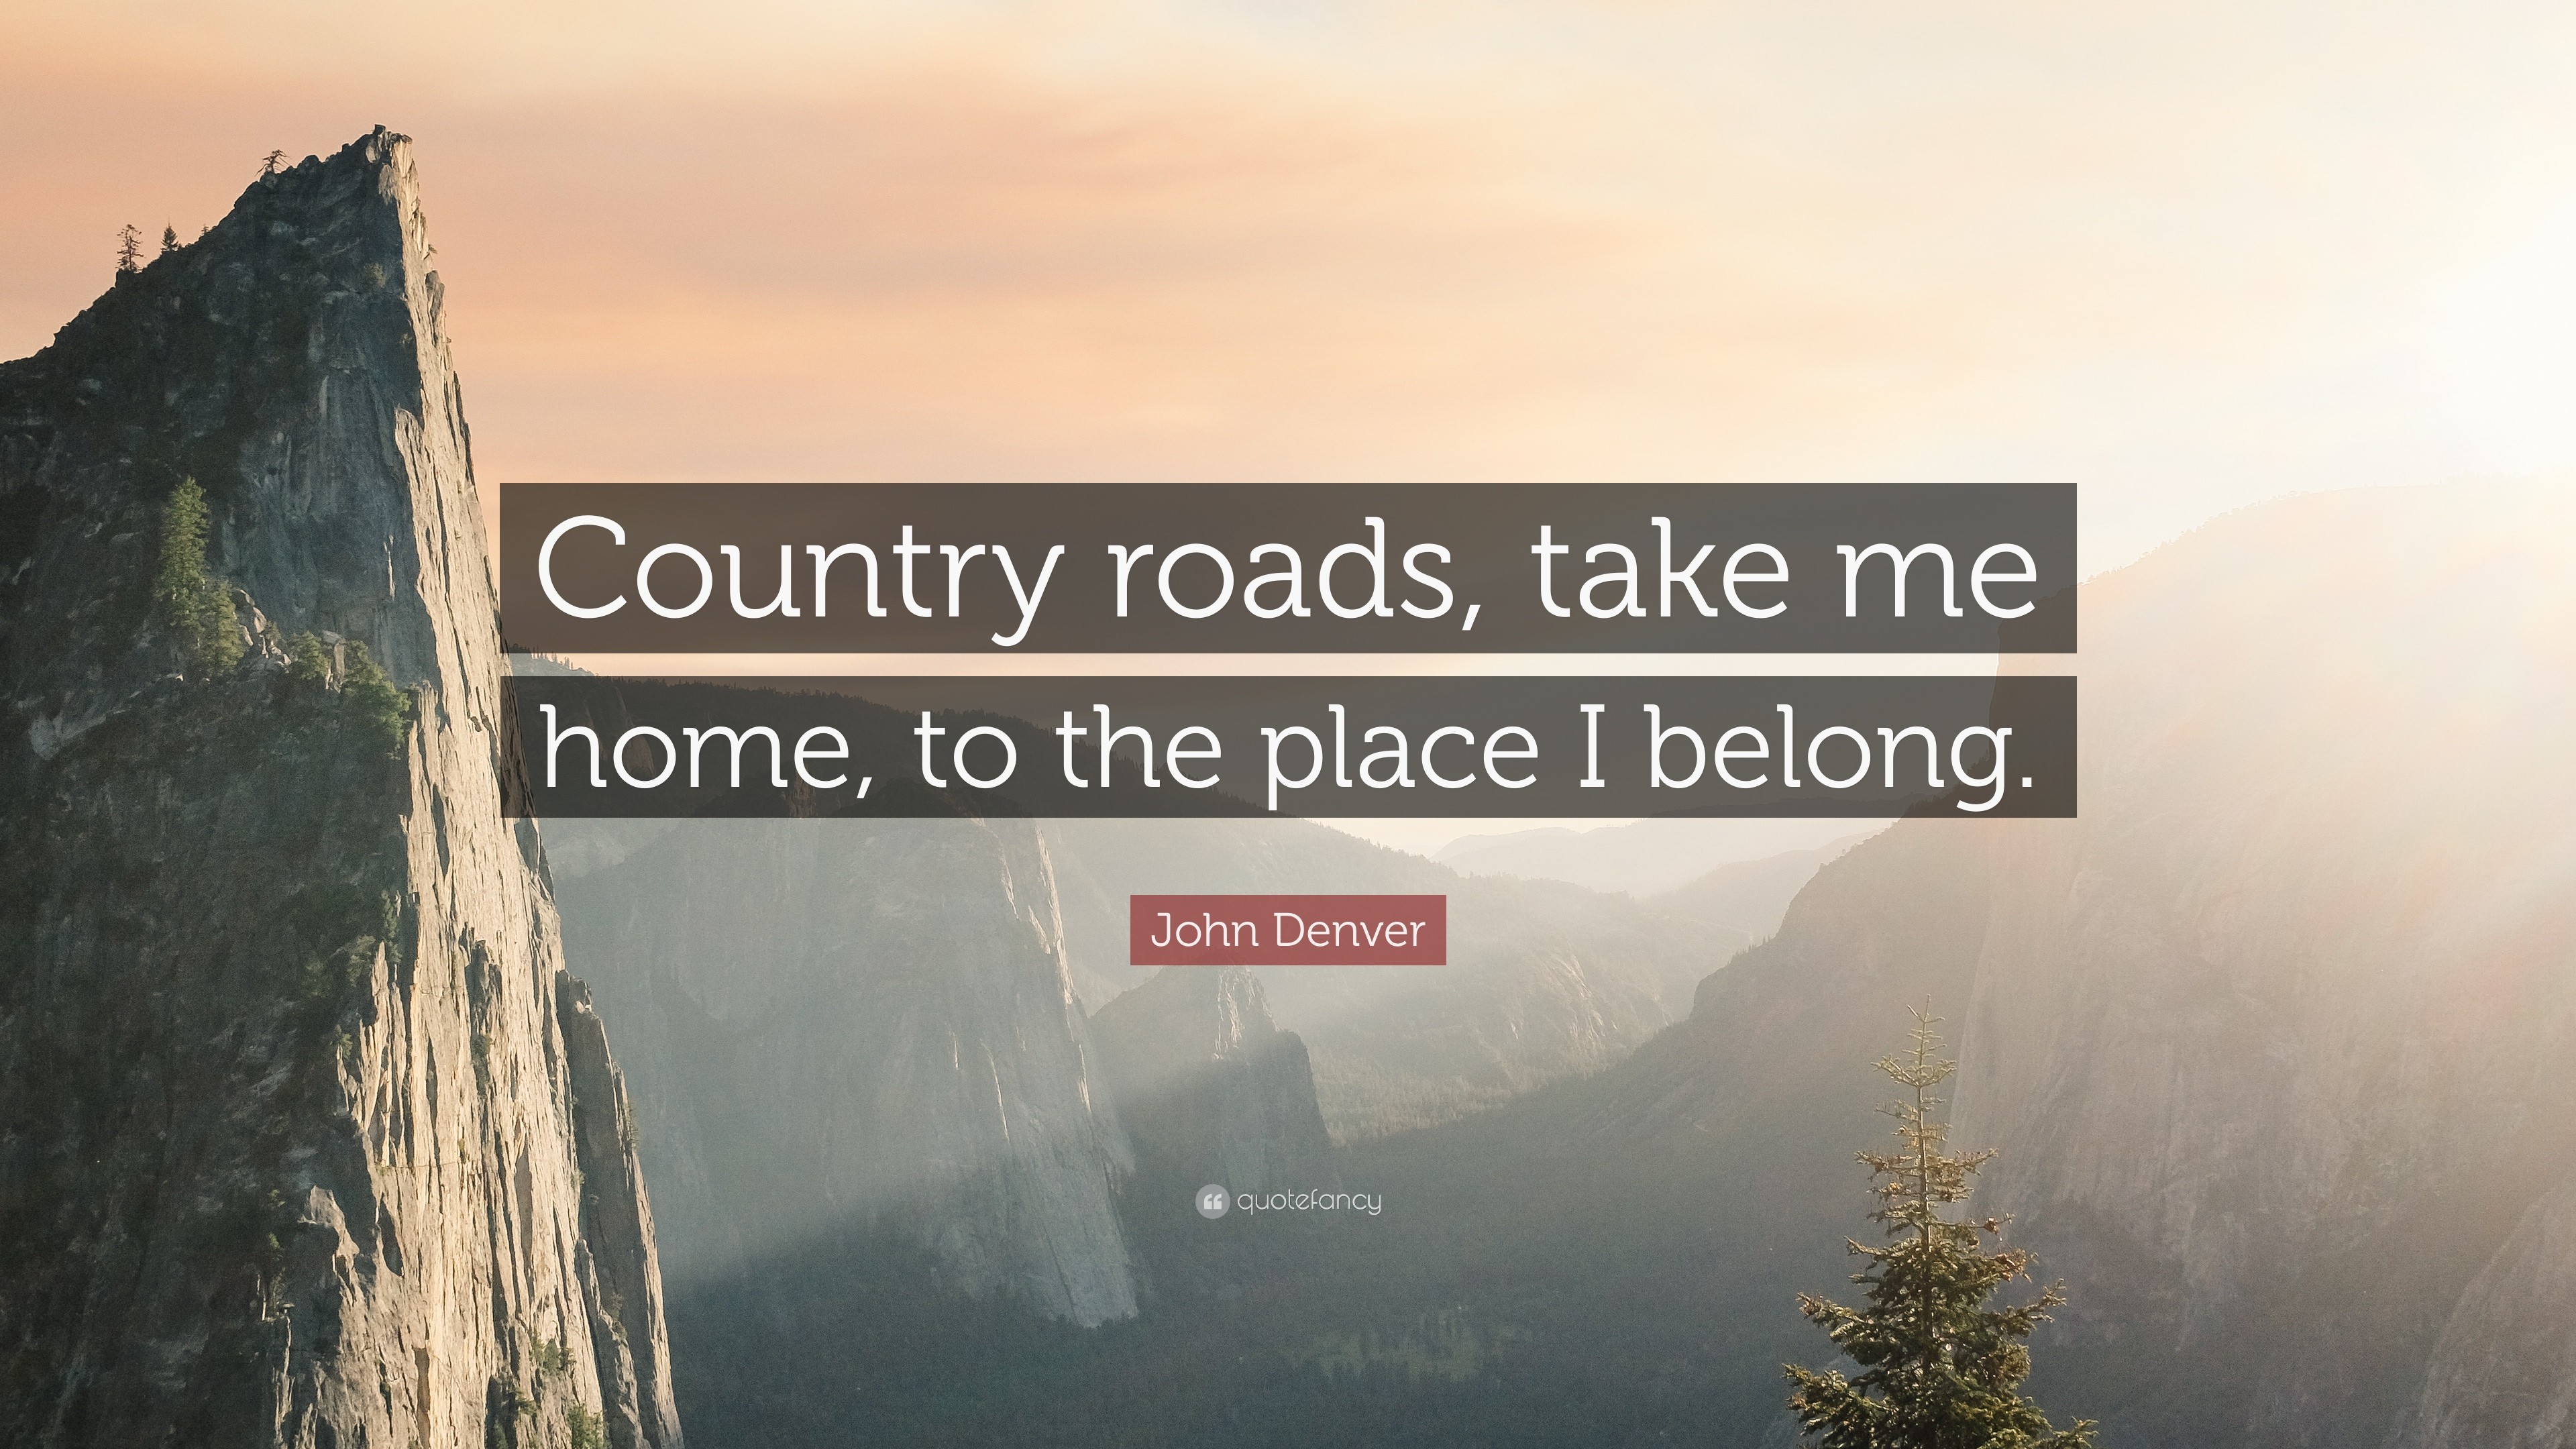 3840x2160 John Denver Quote: “Country roads, take me home, to the place I